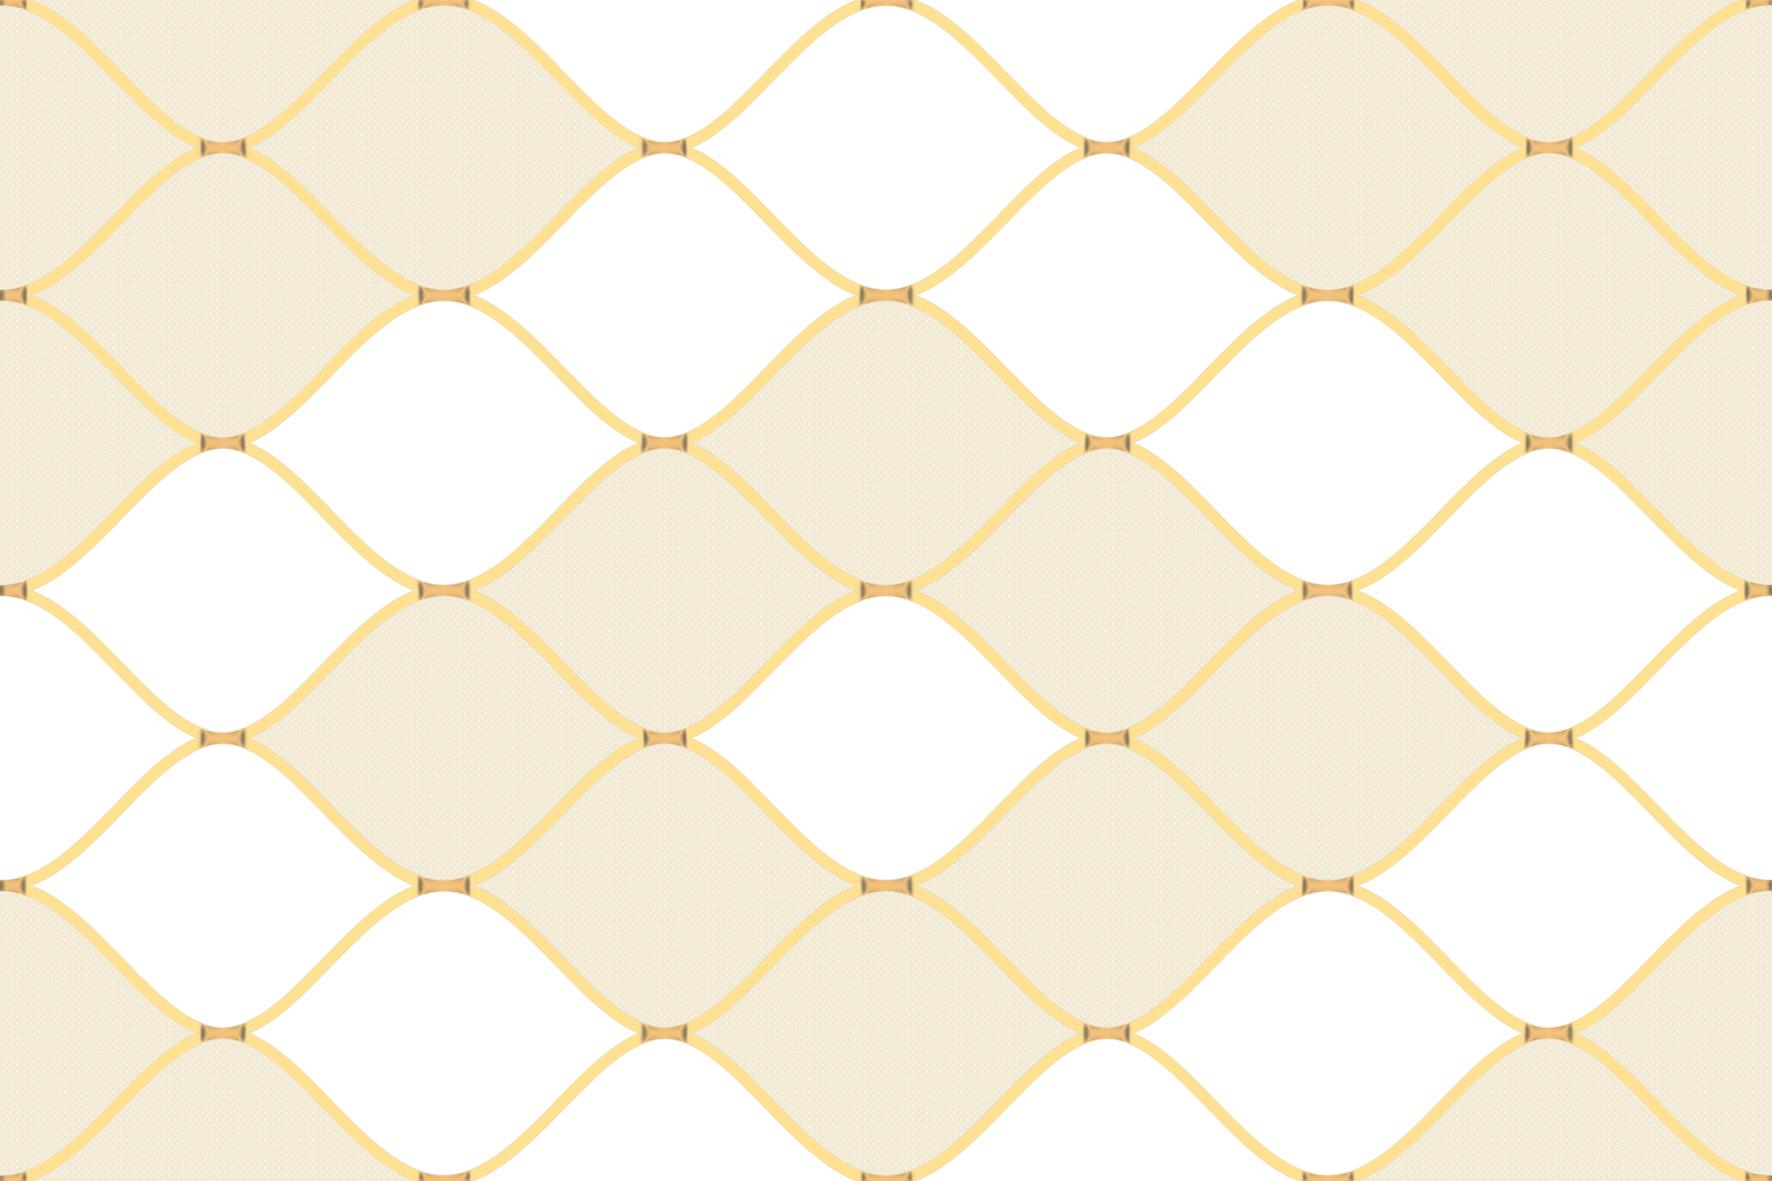 Stylized Tiles for Pooja Room